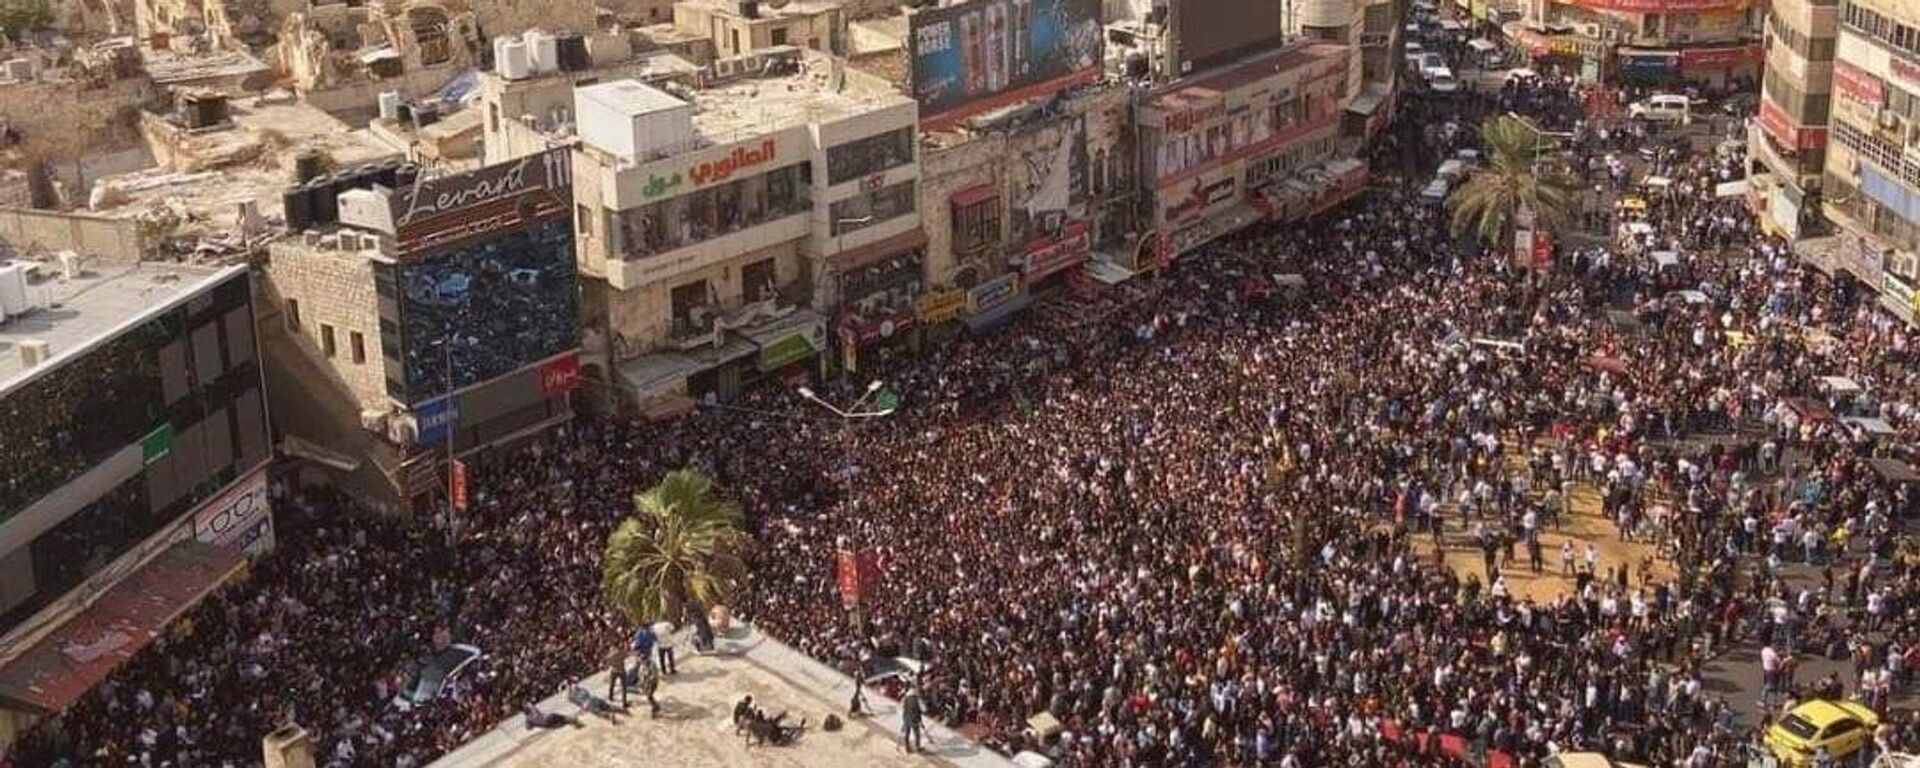 A large funeral procession in Nablus, West Bank, on October 25, 2022, for five Palestinians killed in an IDF raid on a Palestinian militia group headquarters. - Sputnik International, 1920, 26.10.2022